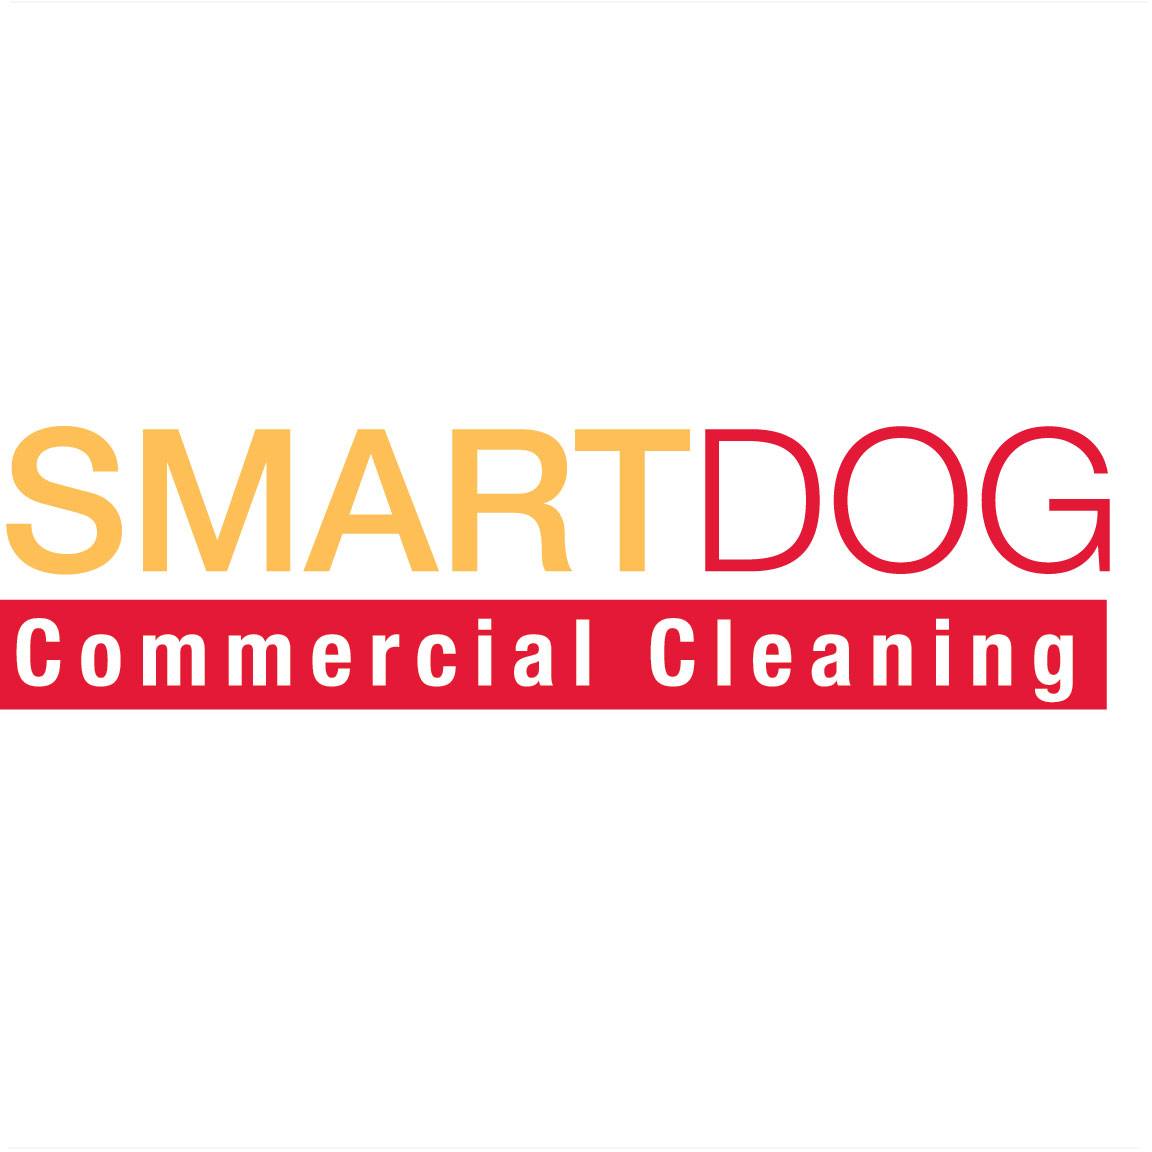 SmartDog Commercial Cleaning